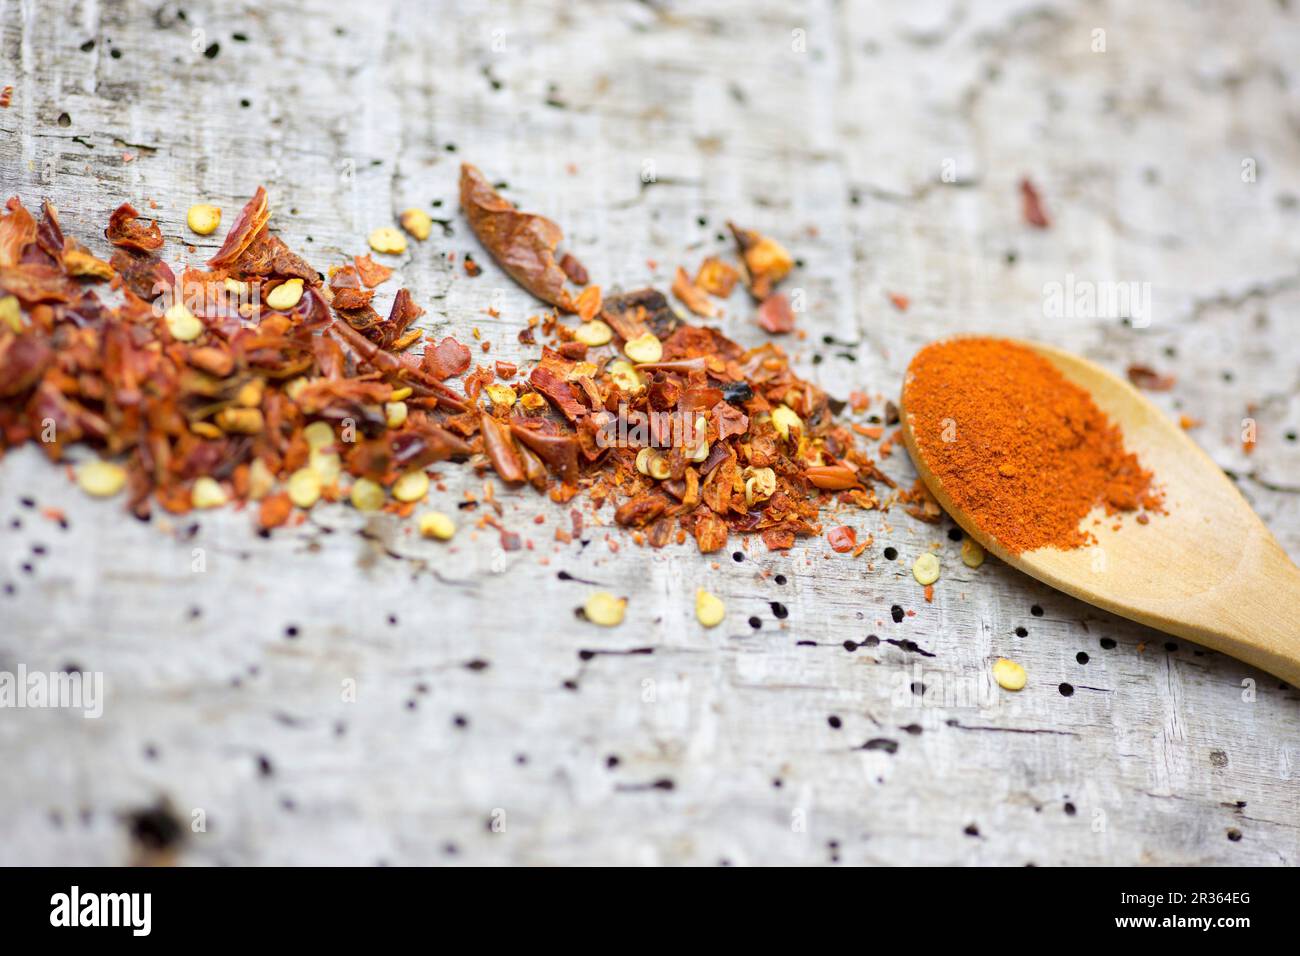 Chilli powder on a wooden spoon and chilli flakes on a wooden surface Stock Photo